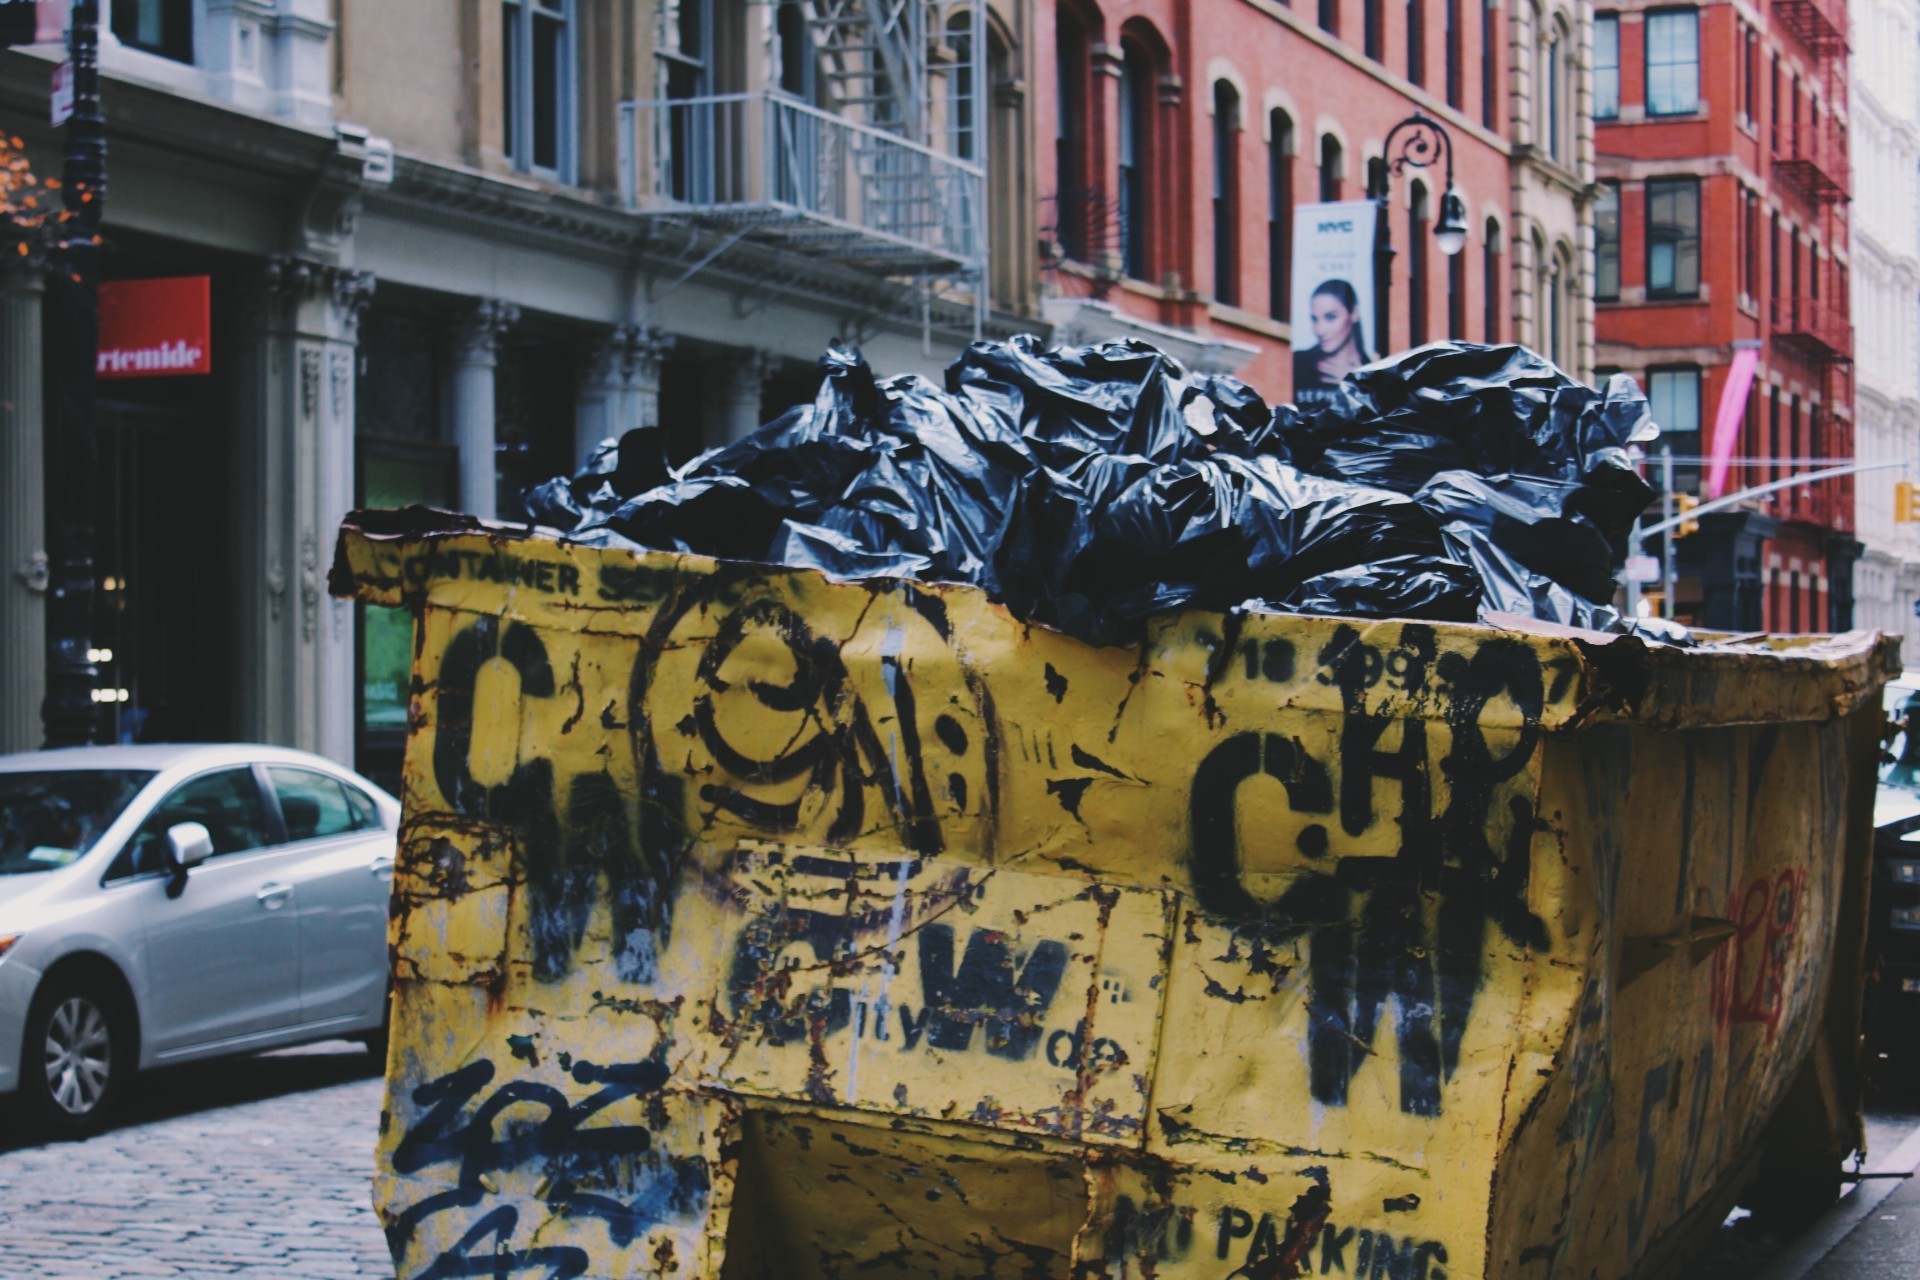 When rubbish takes over cities: the circular economy as a solution to combat the accumulation of waste